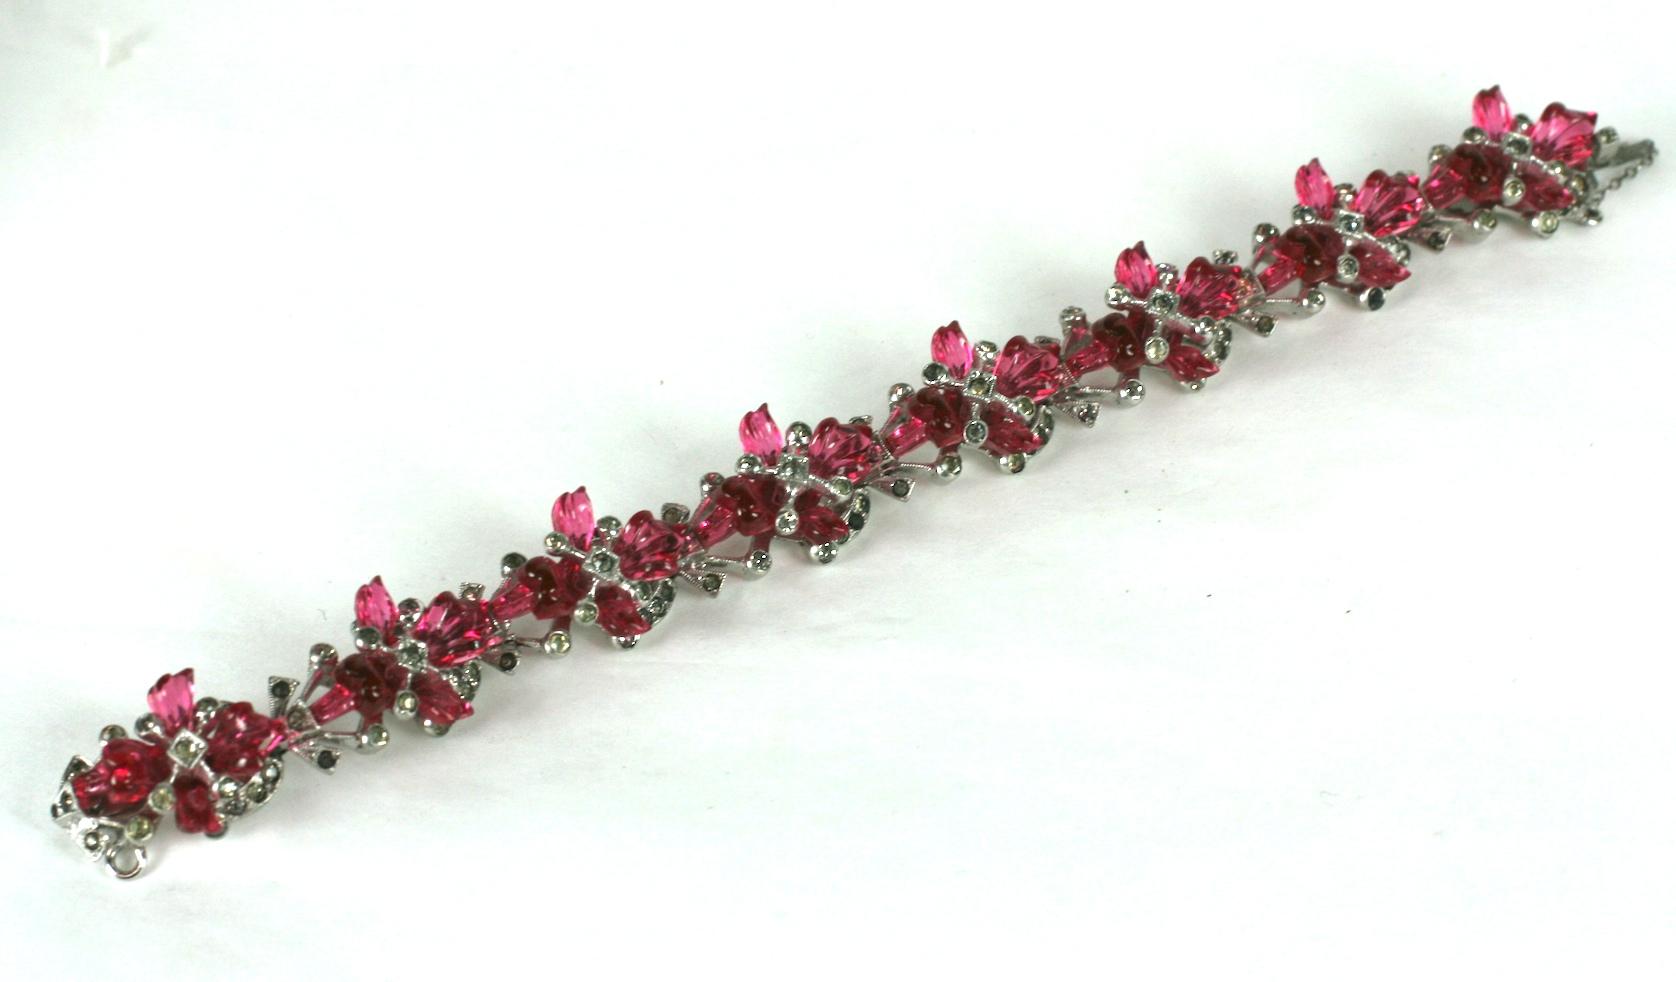 Ralph de Rosa rare Art Deco floral fruit salad  bracelet of crystal rhinestone pave articulated links set with faux ruby three dimensional glass orchid flower heads on rhodium plate base metal. The orchid flowers are of pressed and fine wheel carved